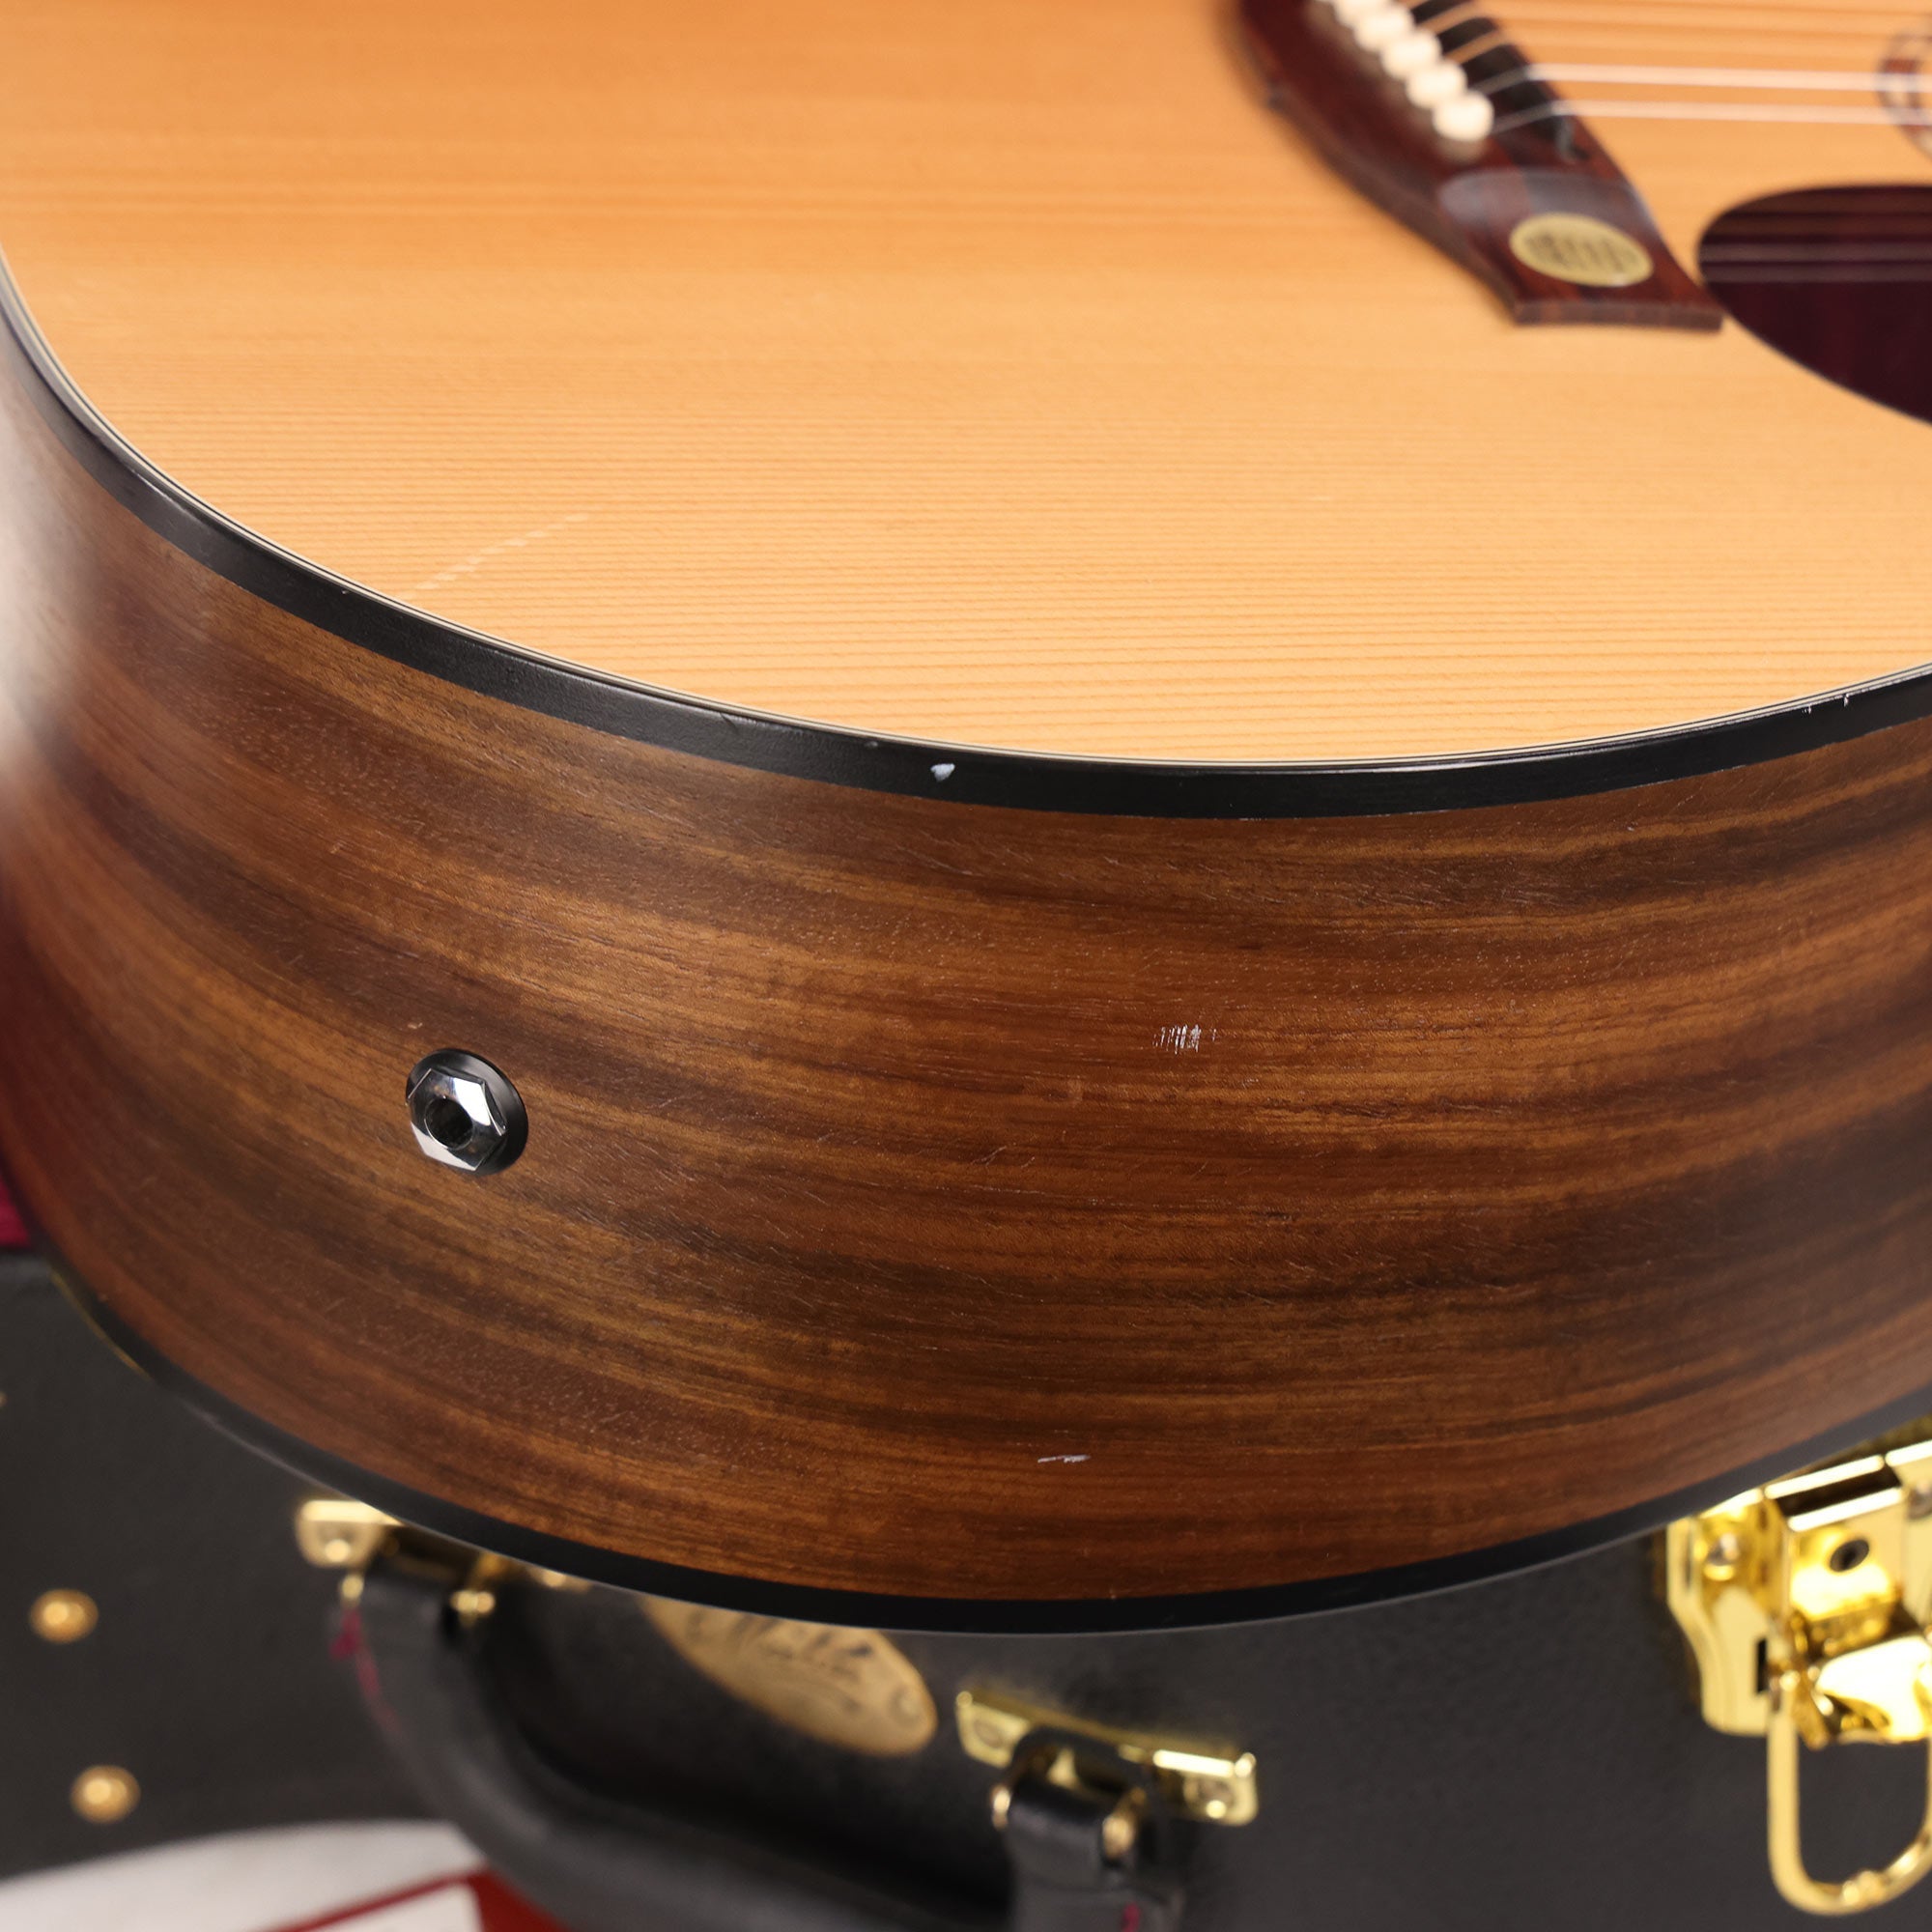 Maton EM325C Acoustic-Electric Used | The Music Zoo